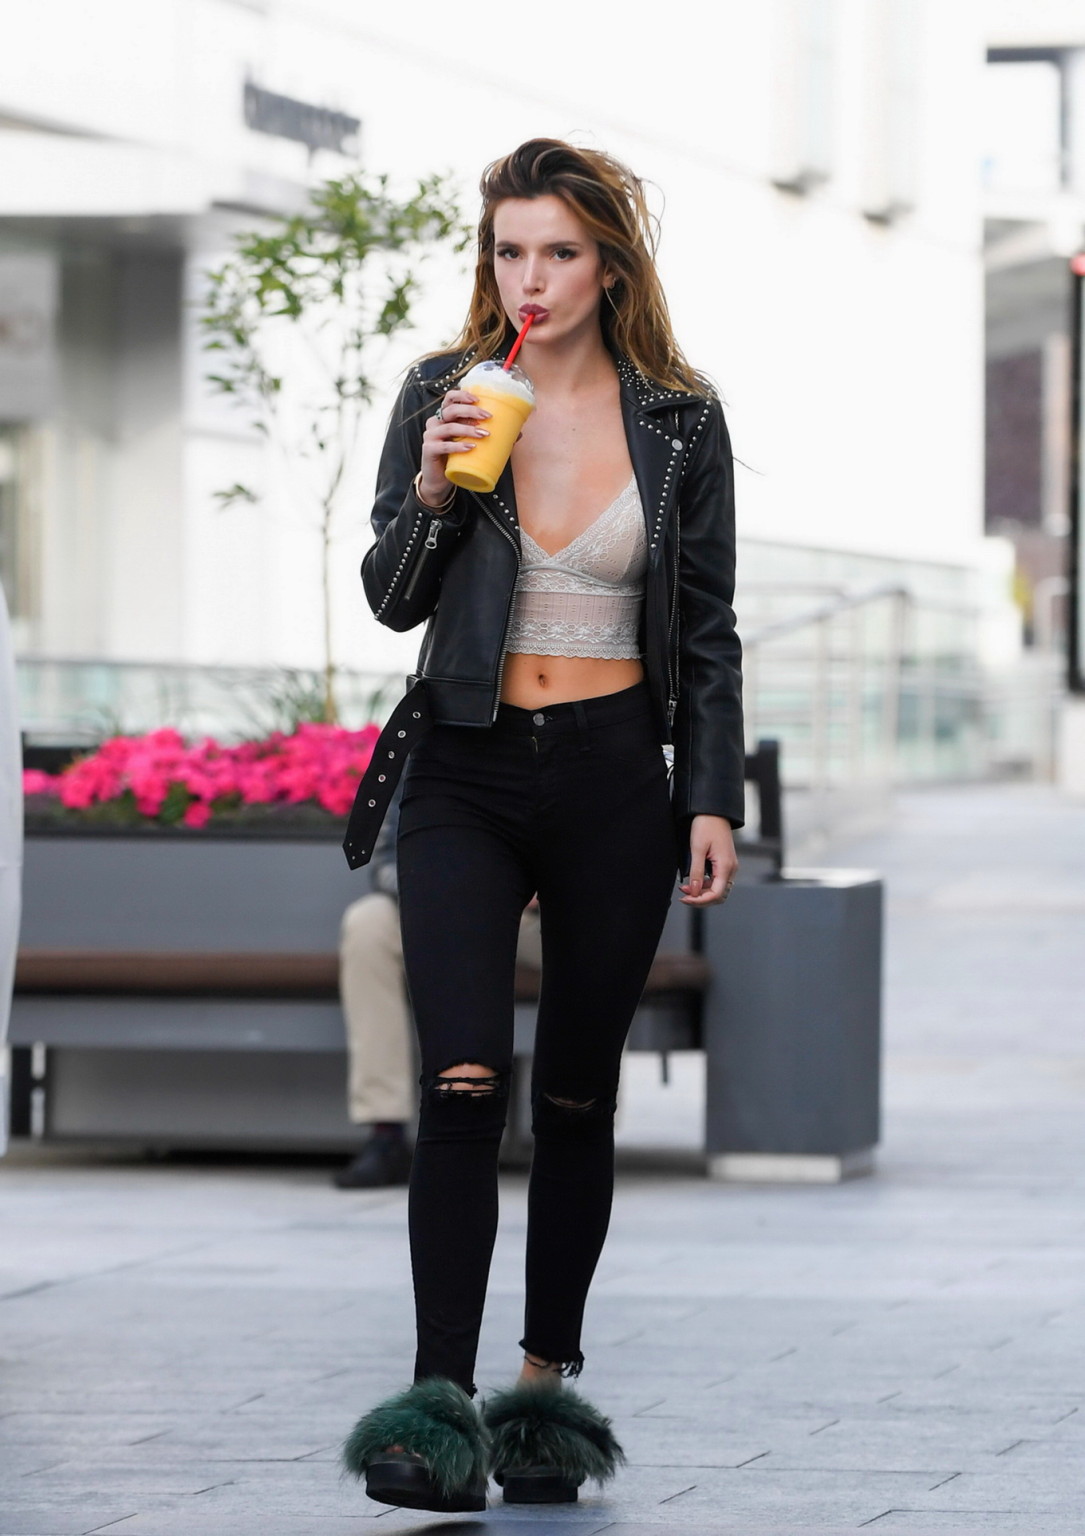 Bella Thorne busty in lace crop top and ripped jeans #75141195